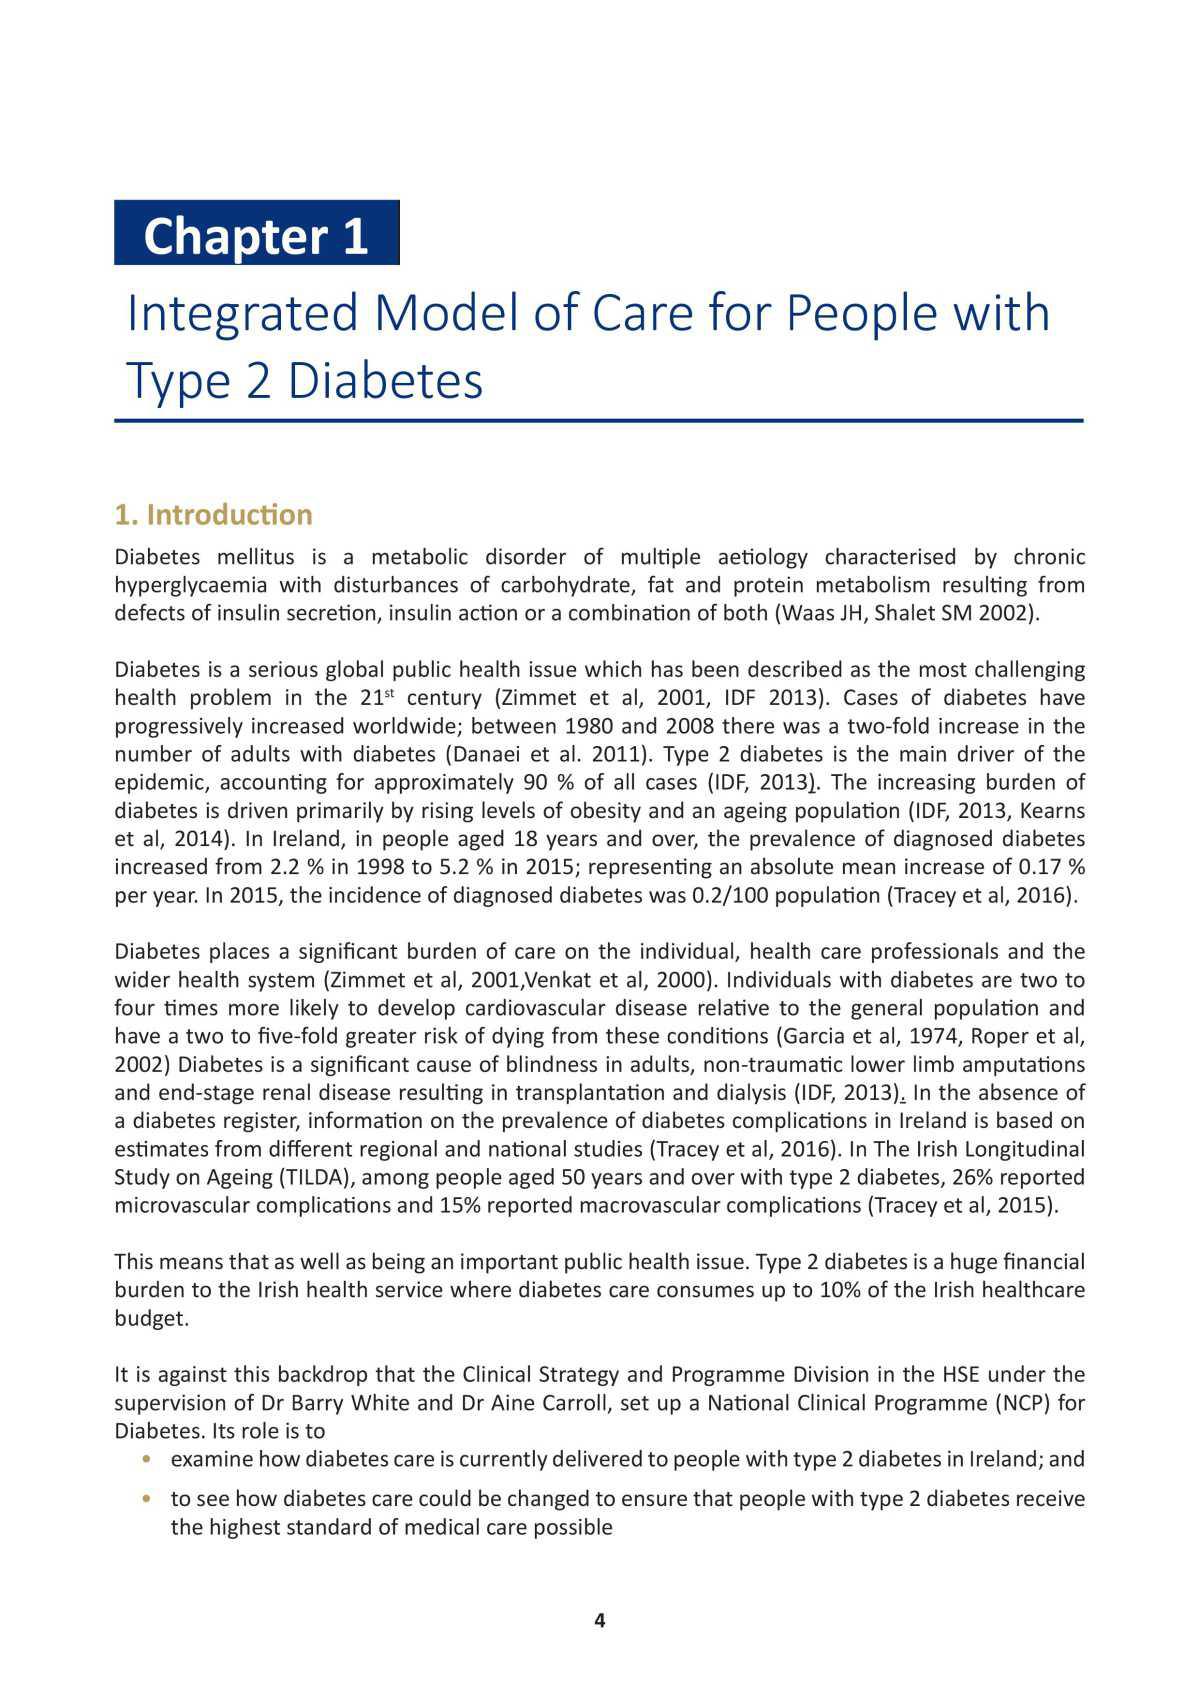 Model of Integrated Care for Patients with Type 2 Diabetes 